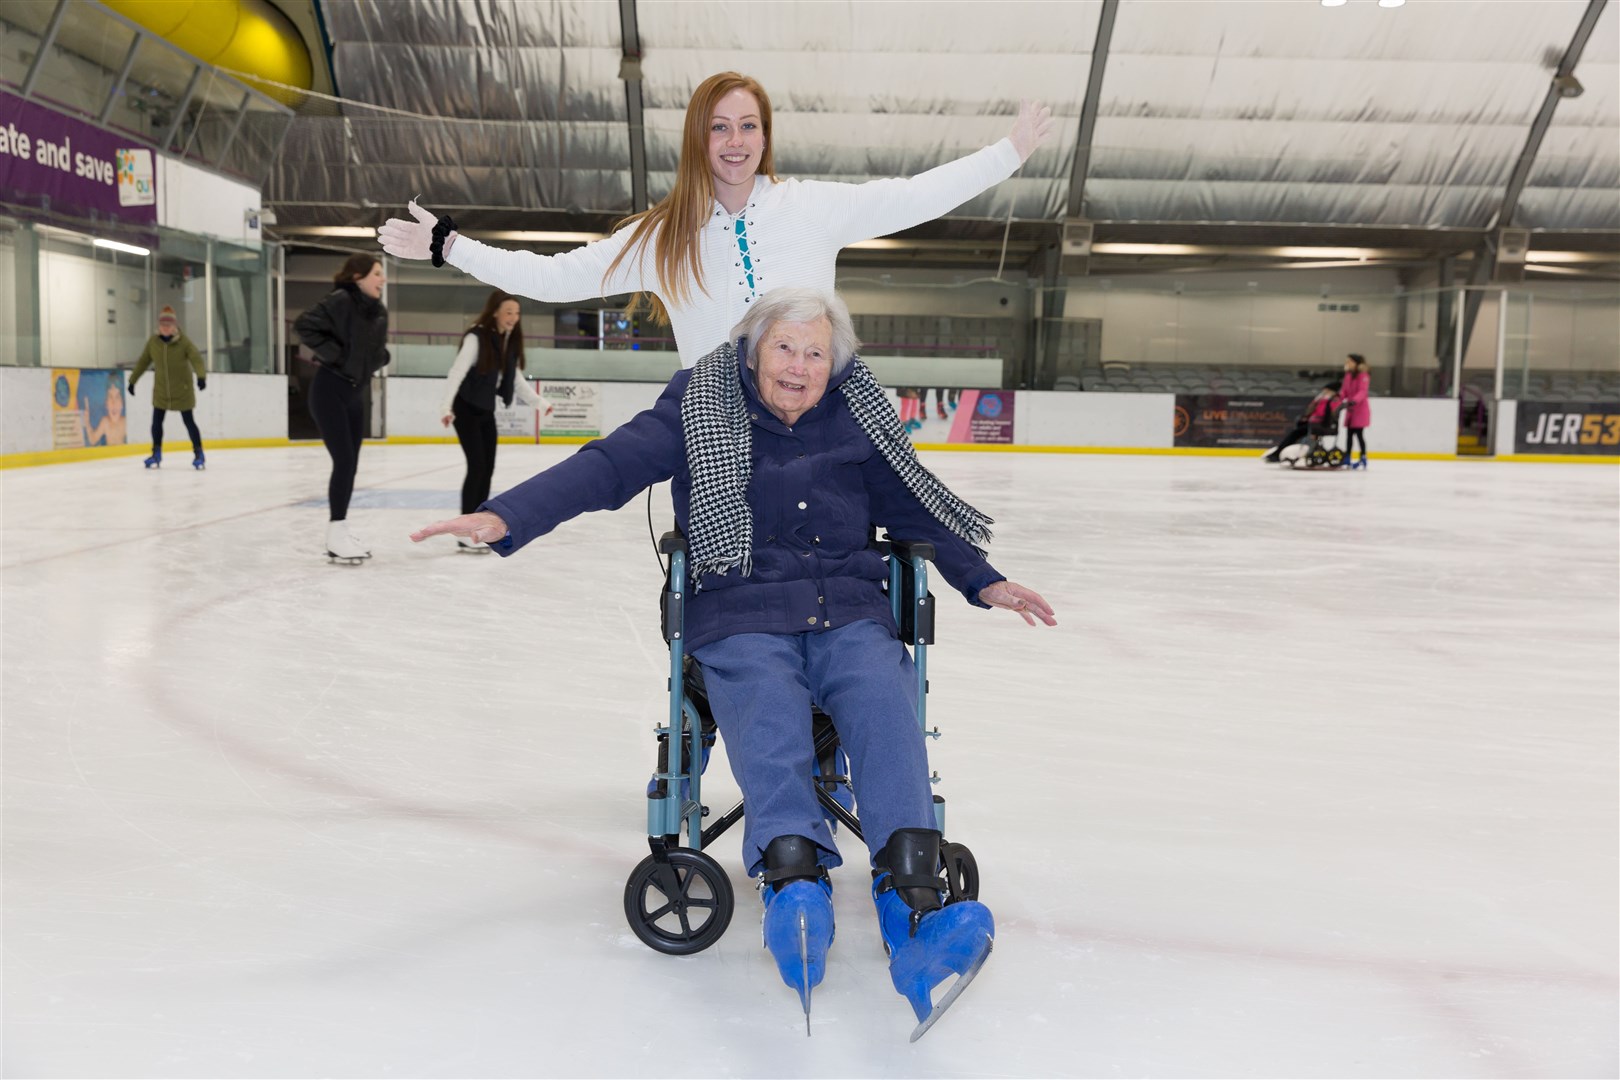 Ms Barber said the experience on the ice was ‘wonderful’ (Care UK/PA)